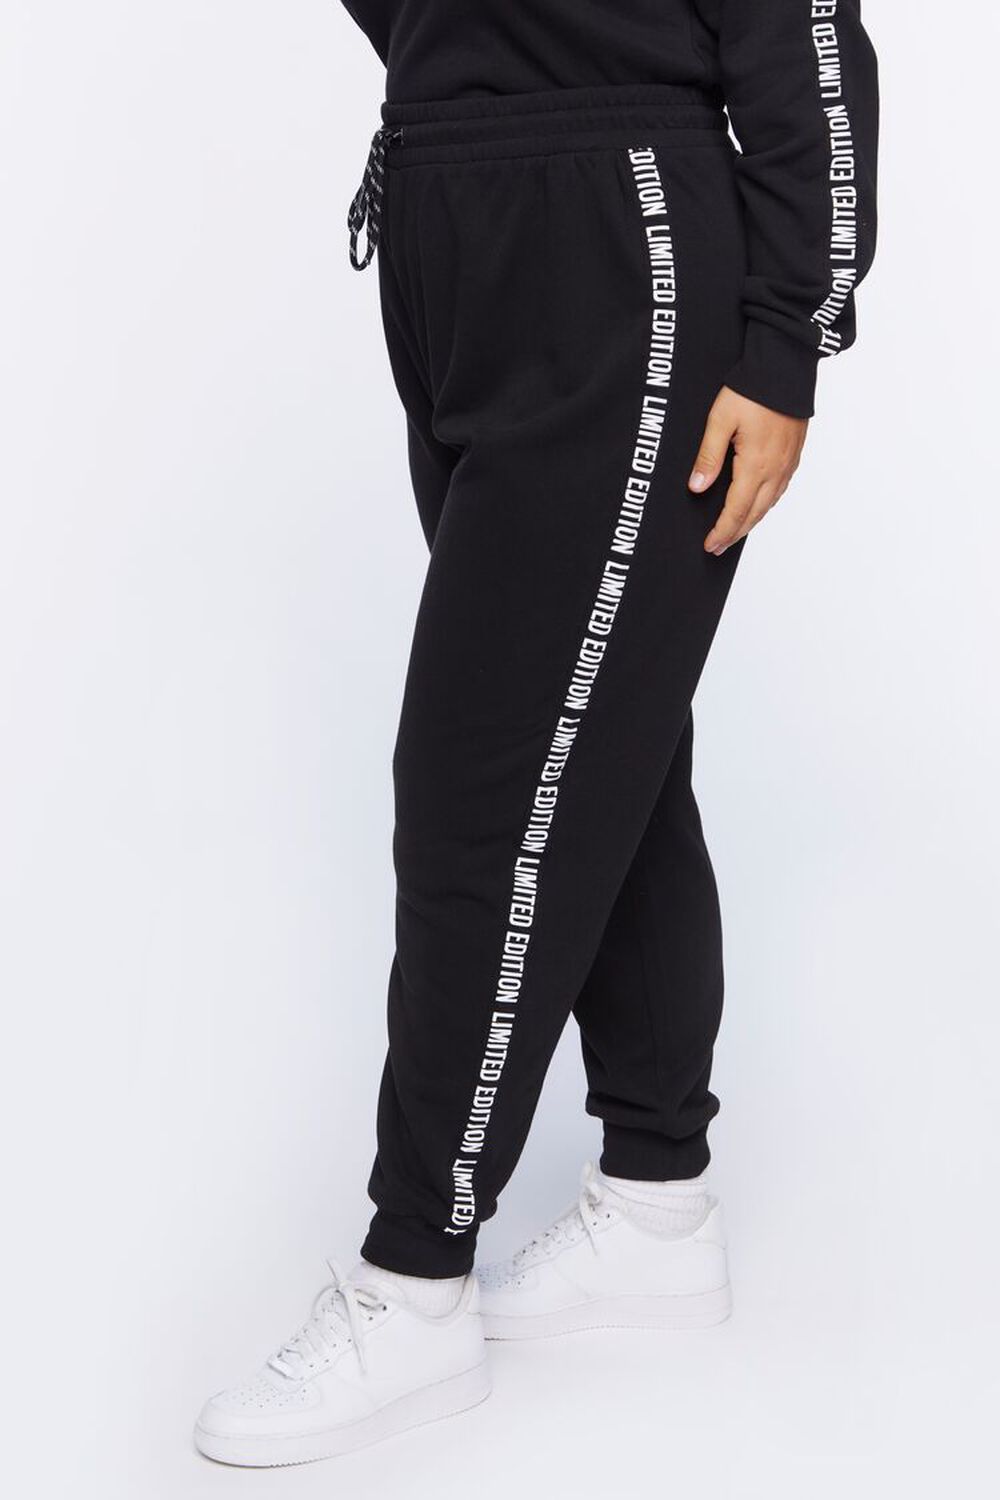 Plus Size Active Limited Edition Joggers, image 3